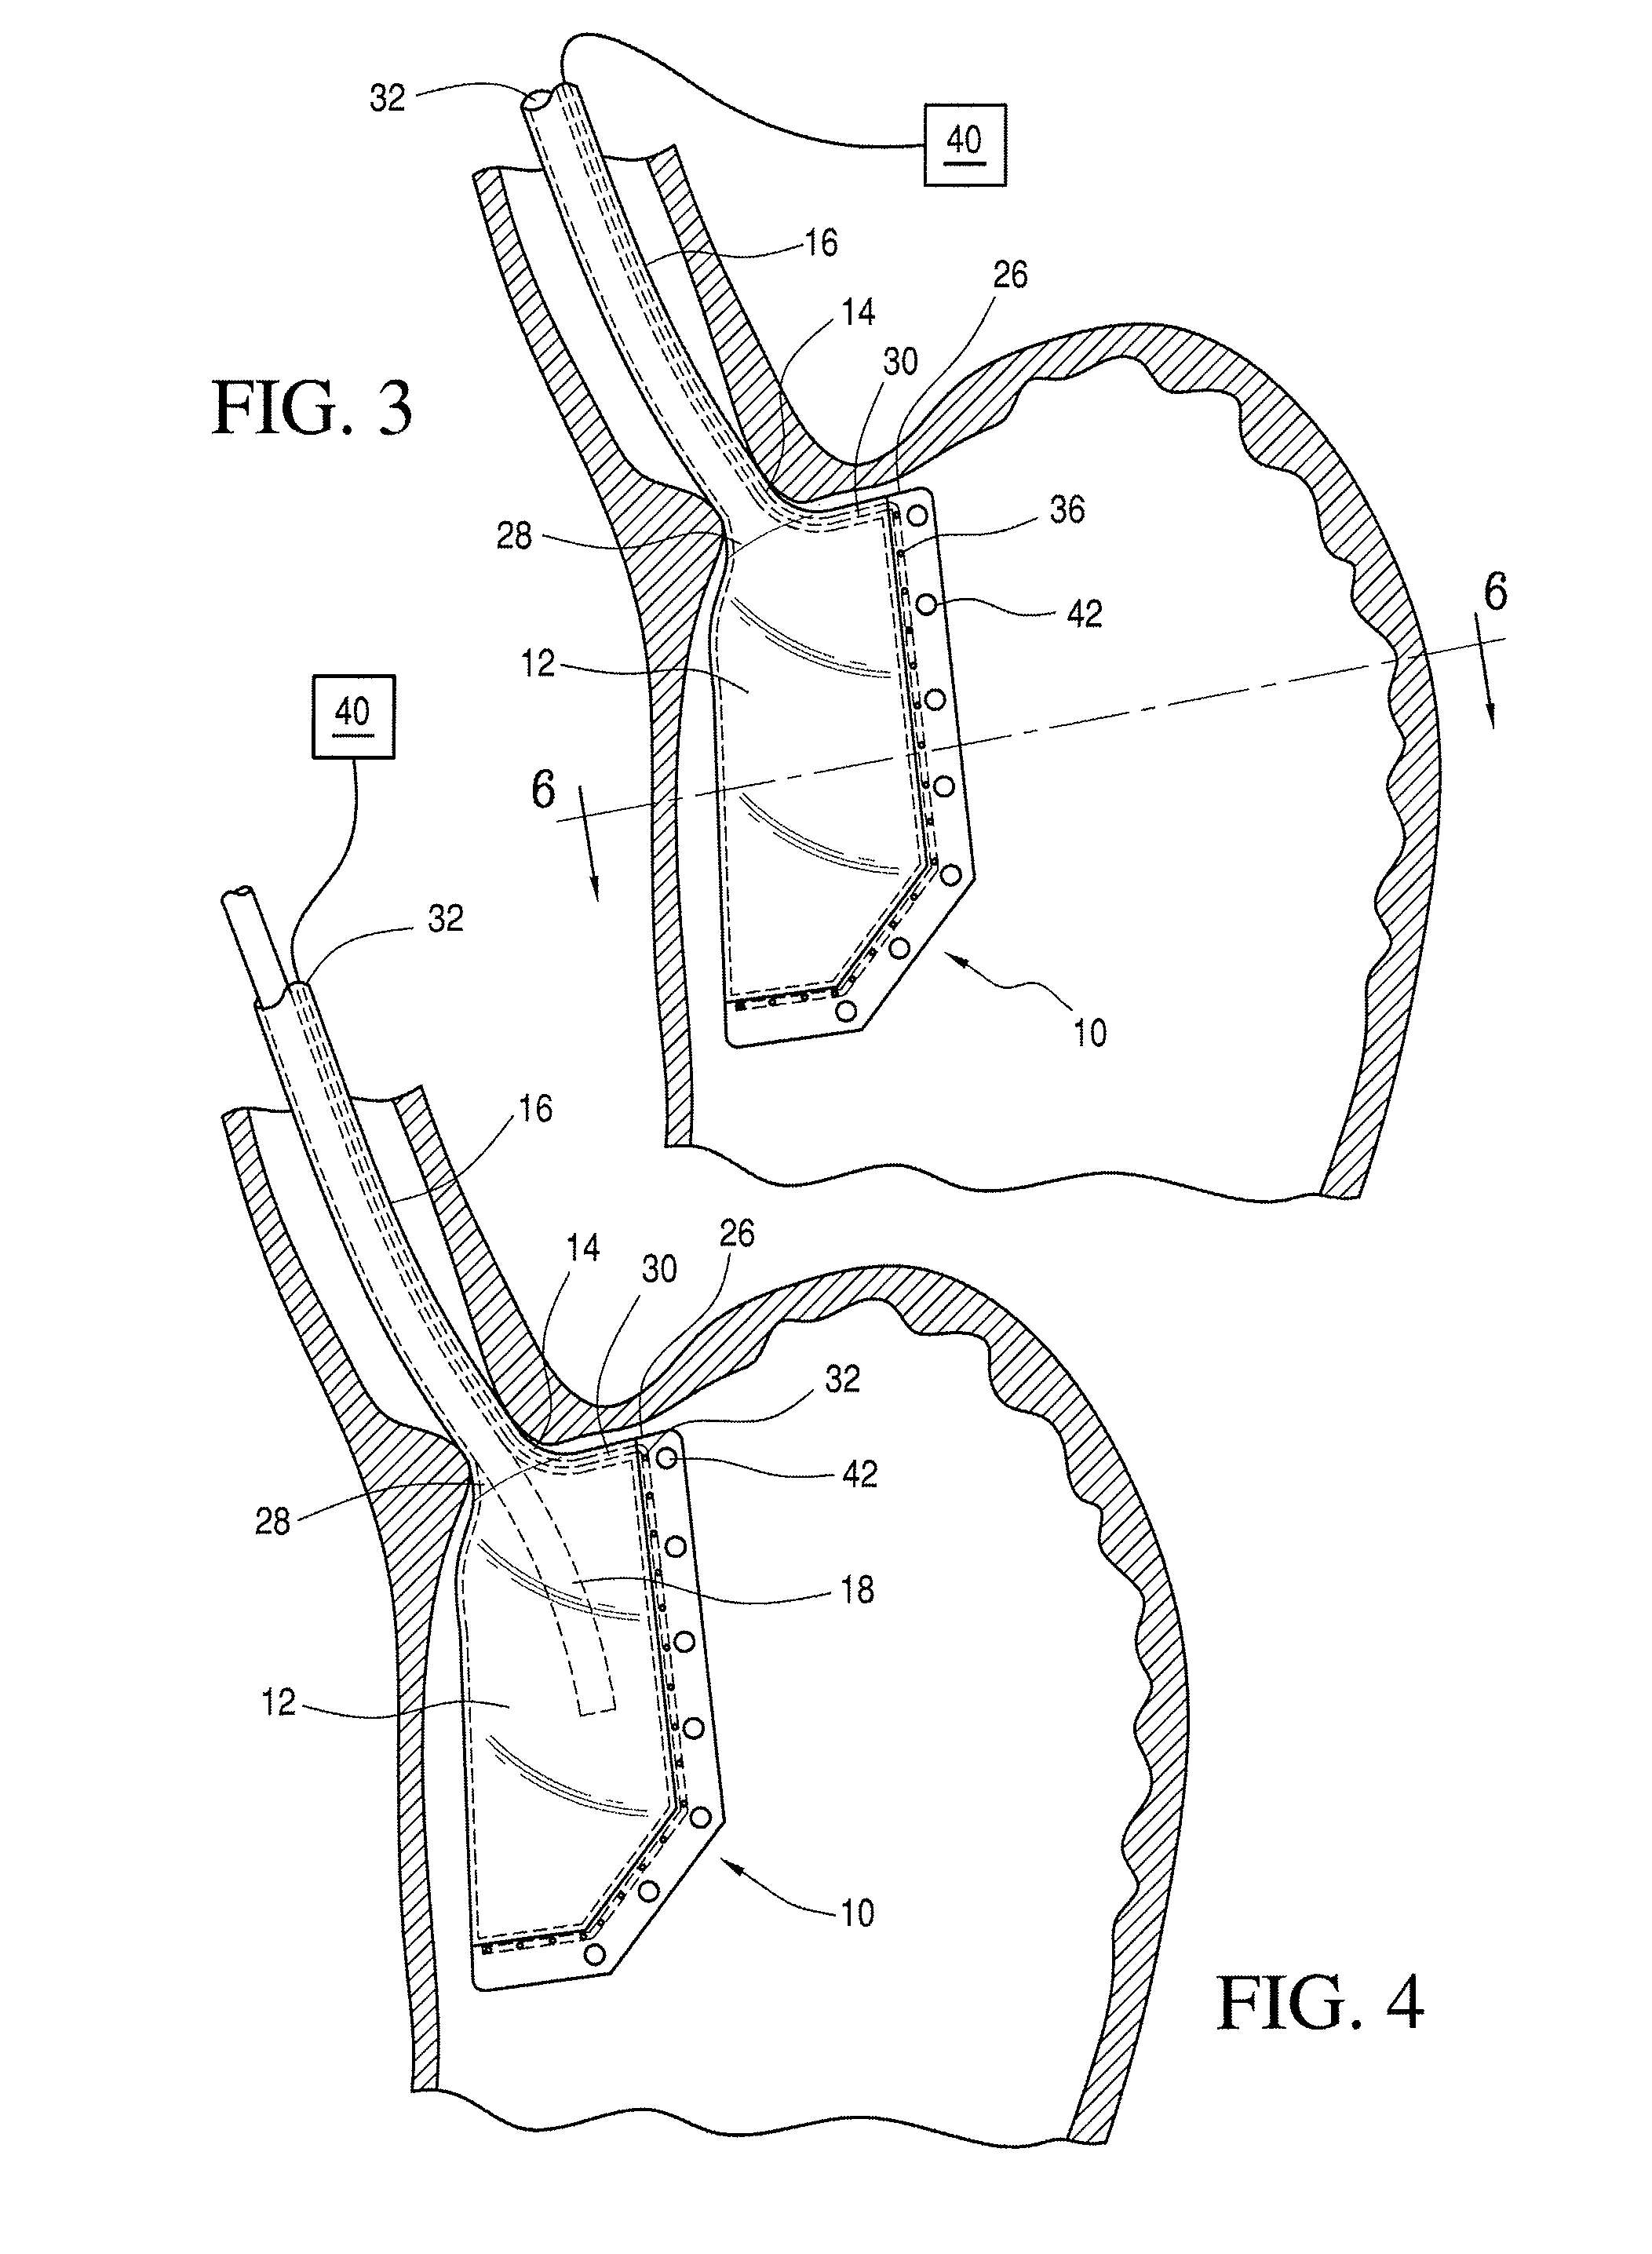 Method and apparatus for marking a lumenal wall